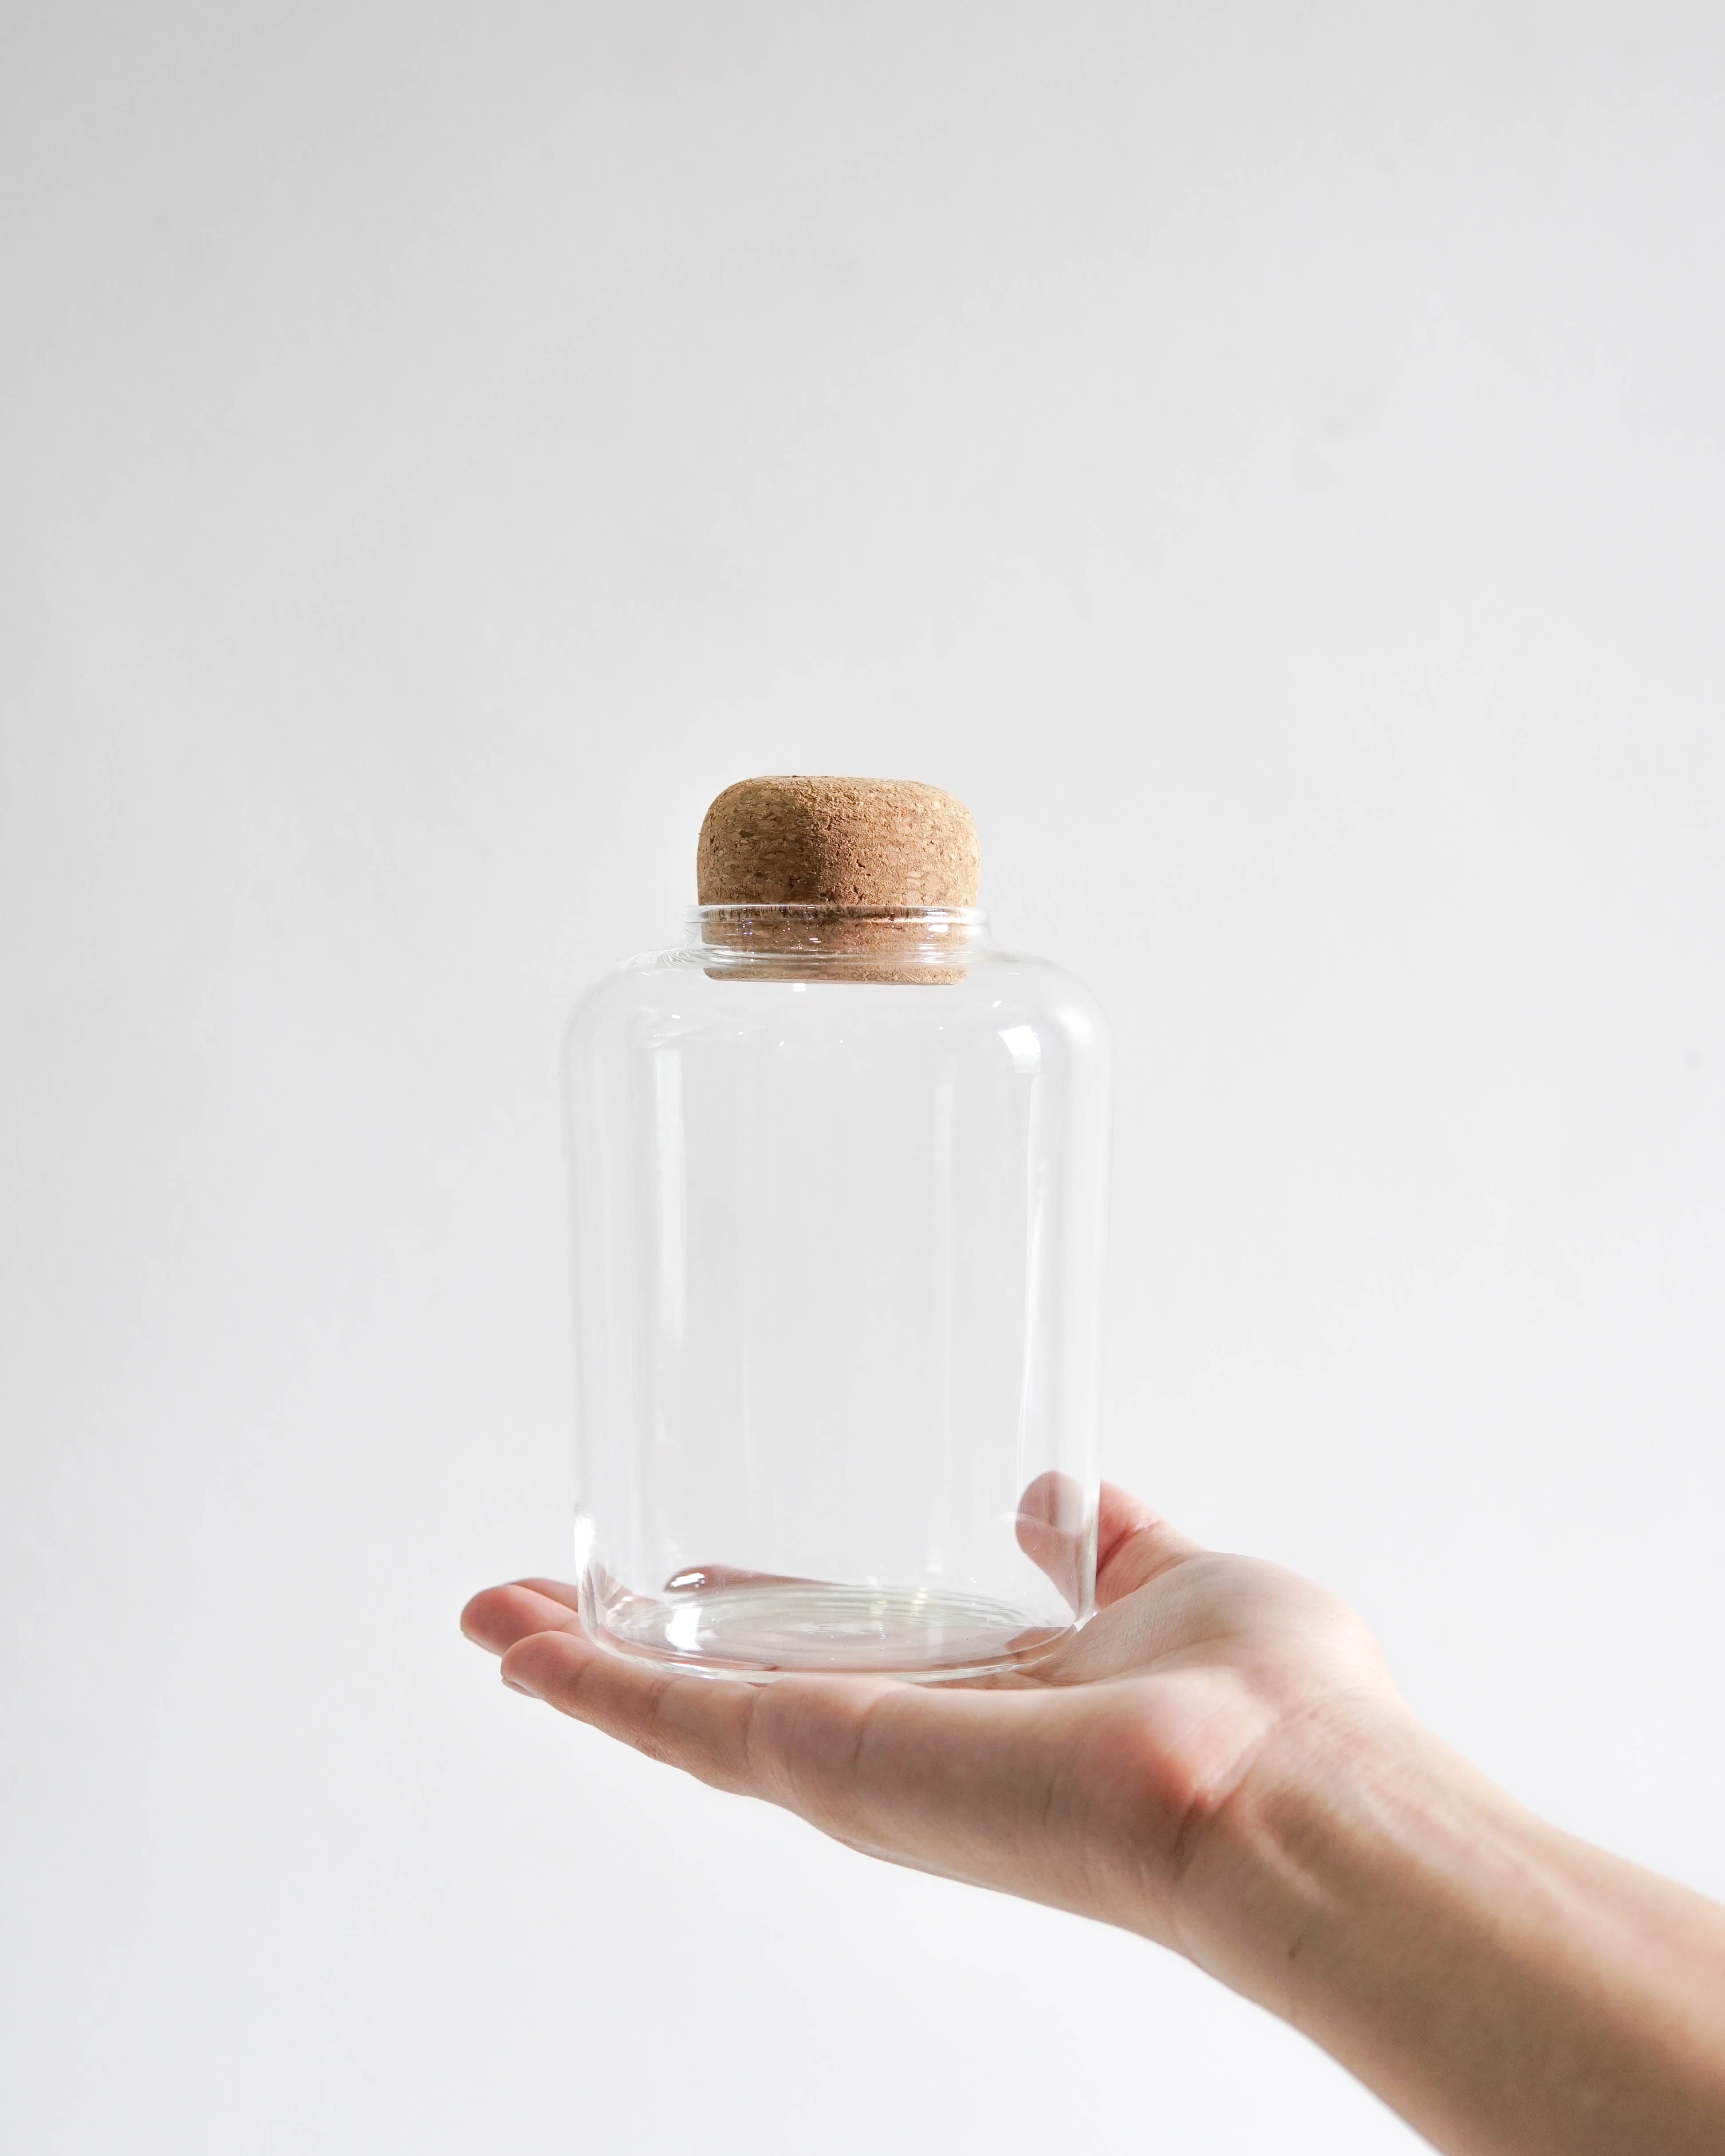 Apothecary Glass Bottle